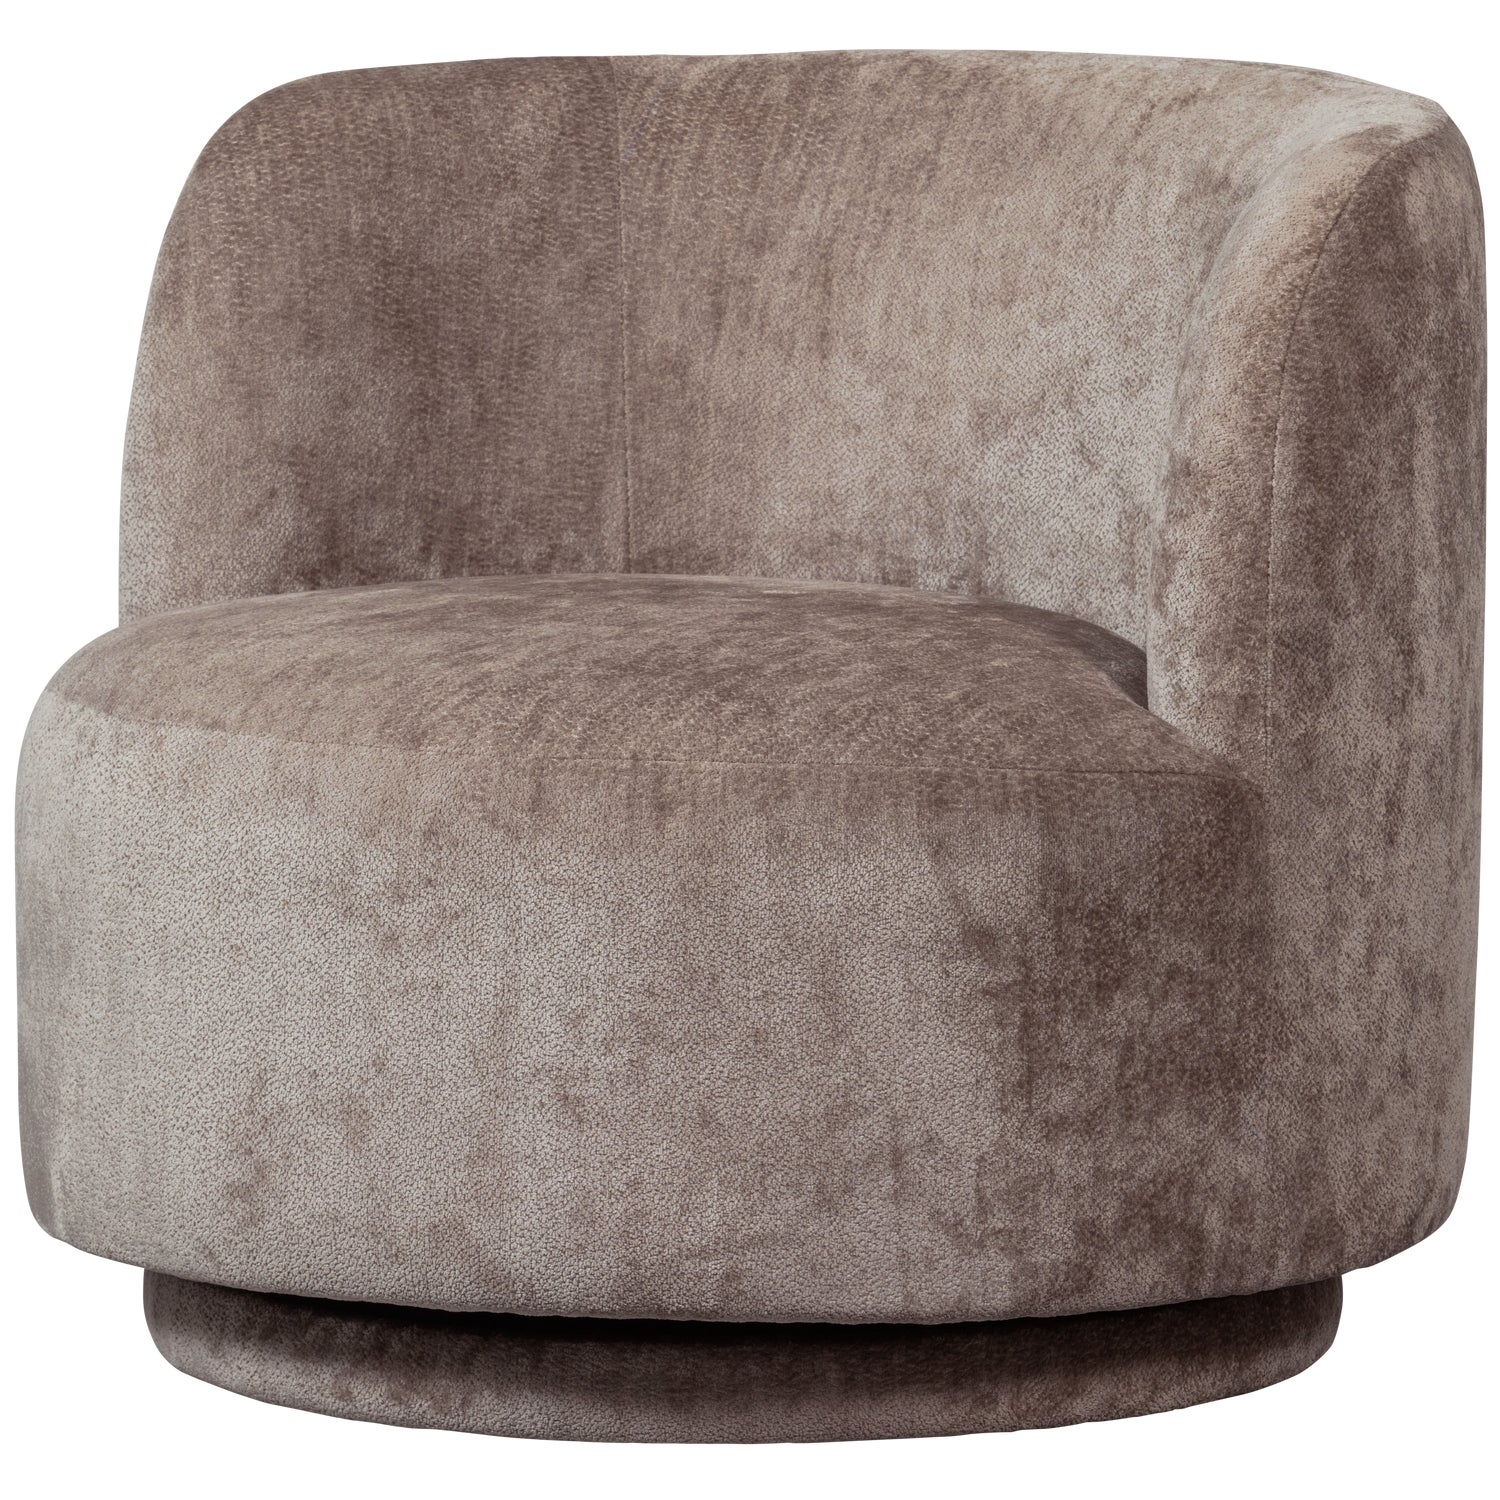 801440-T-02_VS_BP_Popular_fauteuil_taupe_SA.png?auto=webp&format=png&width=1500&height=1500